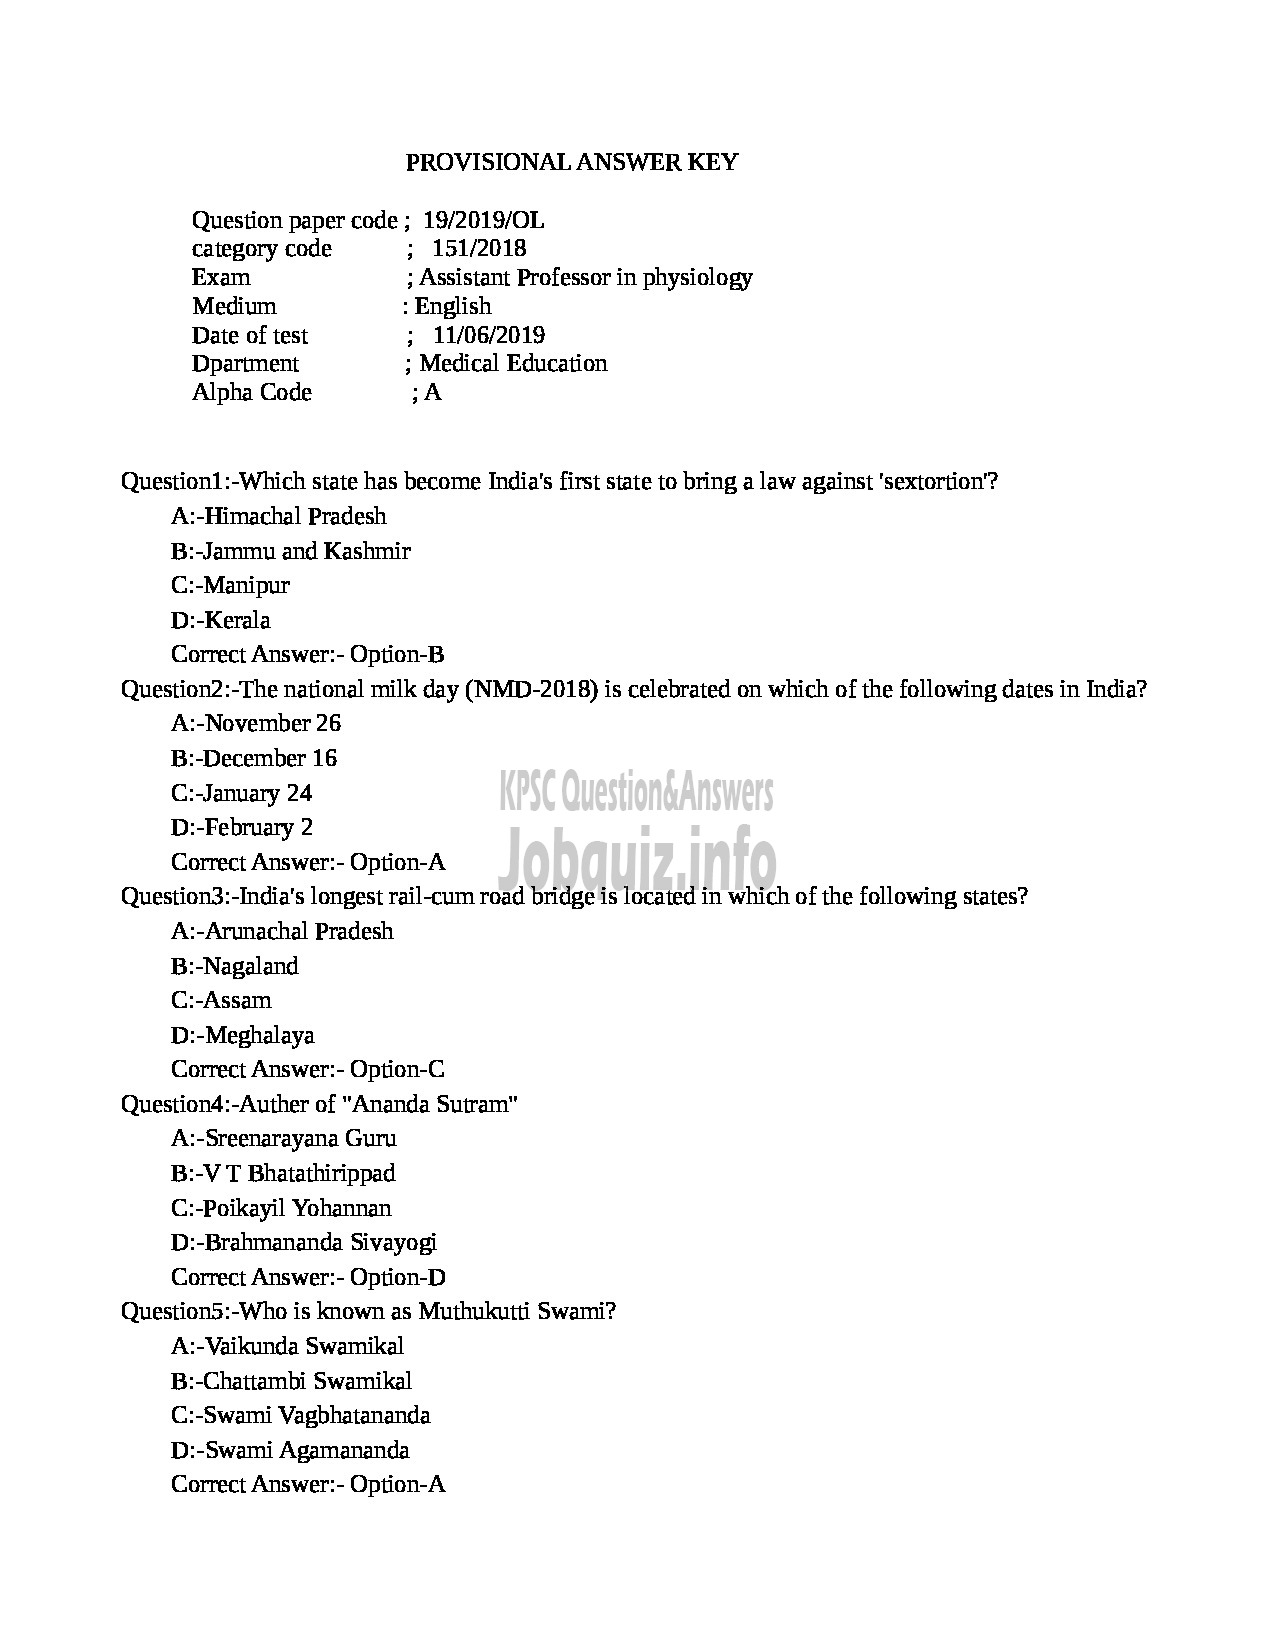 Kerala PSC Question Paper - Assistant Professor in physiology Medical Education-1